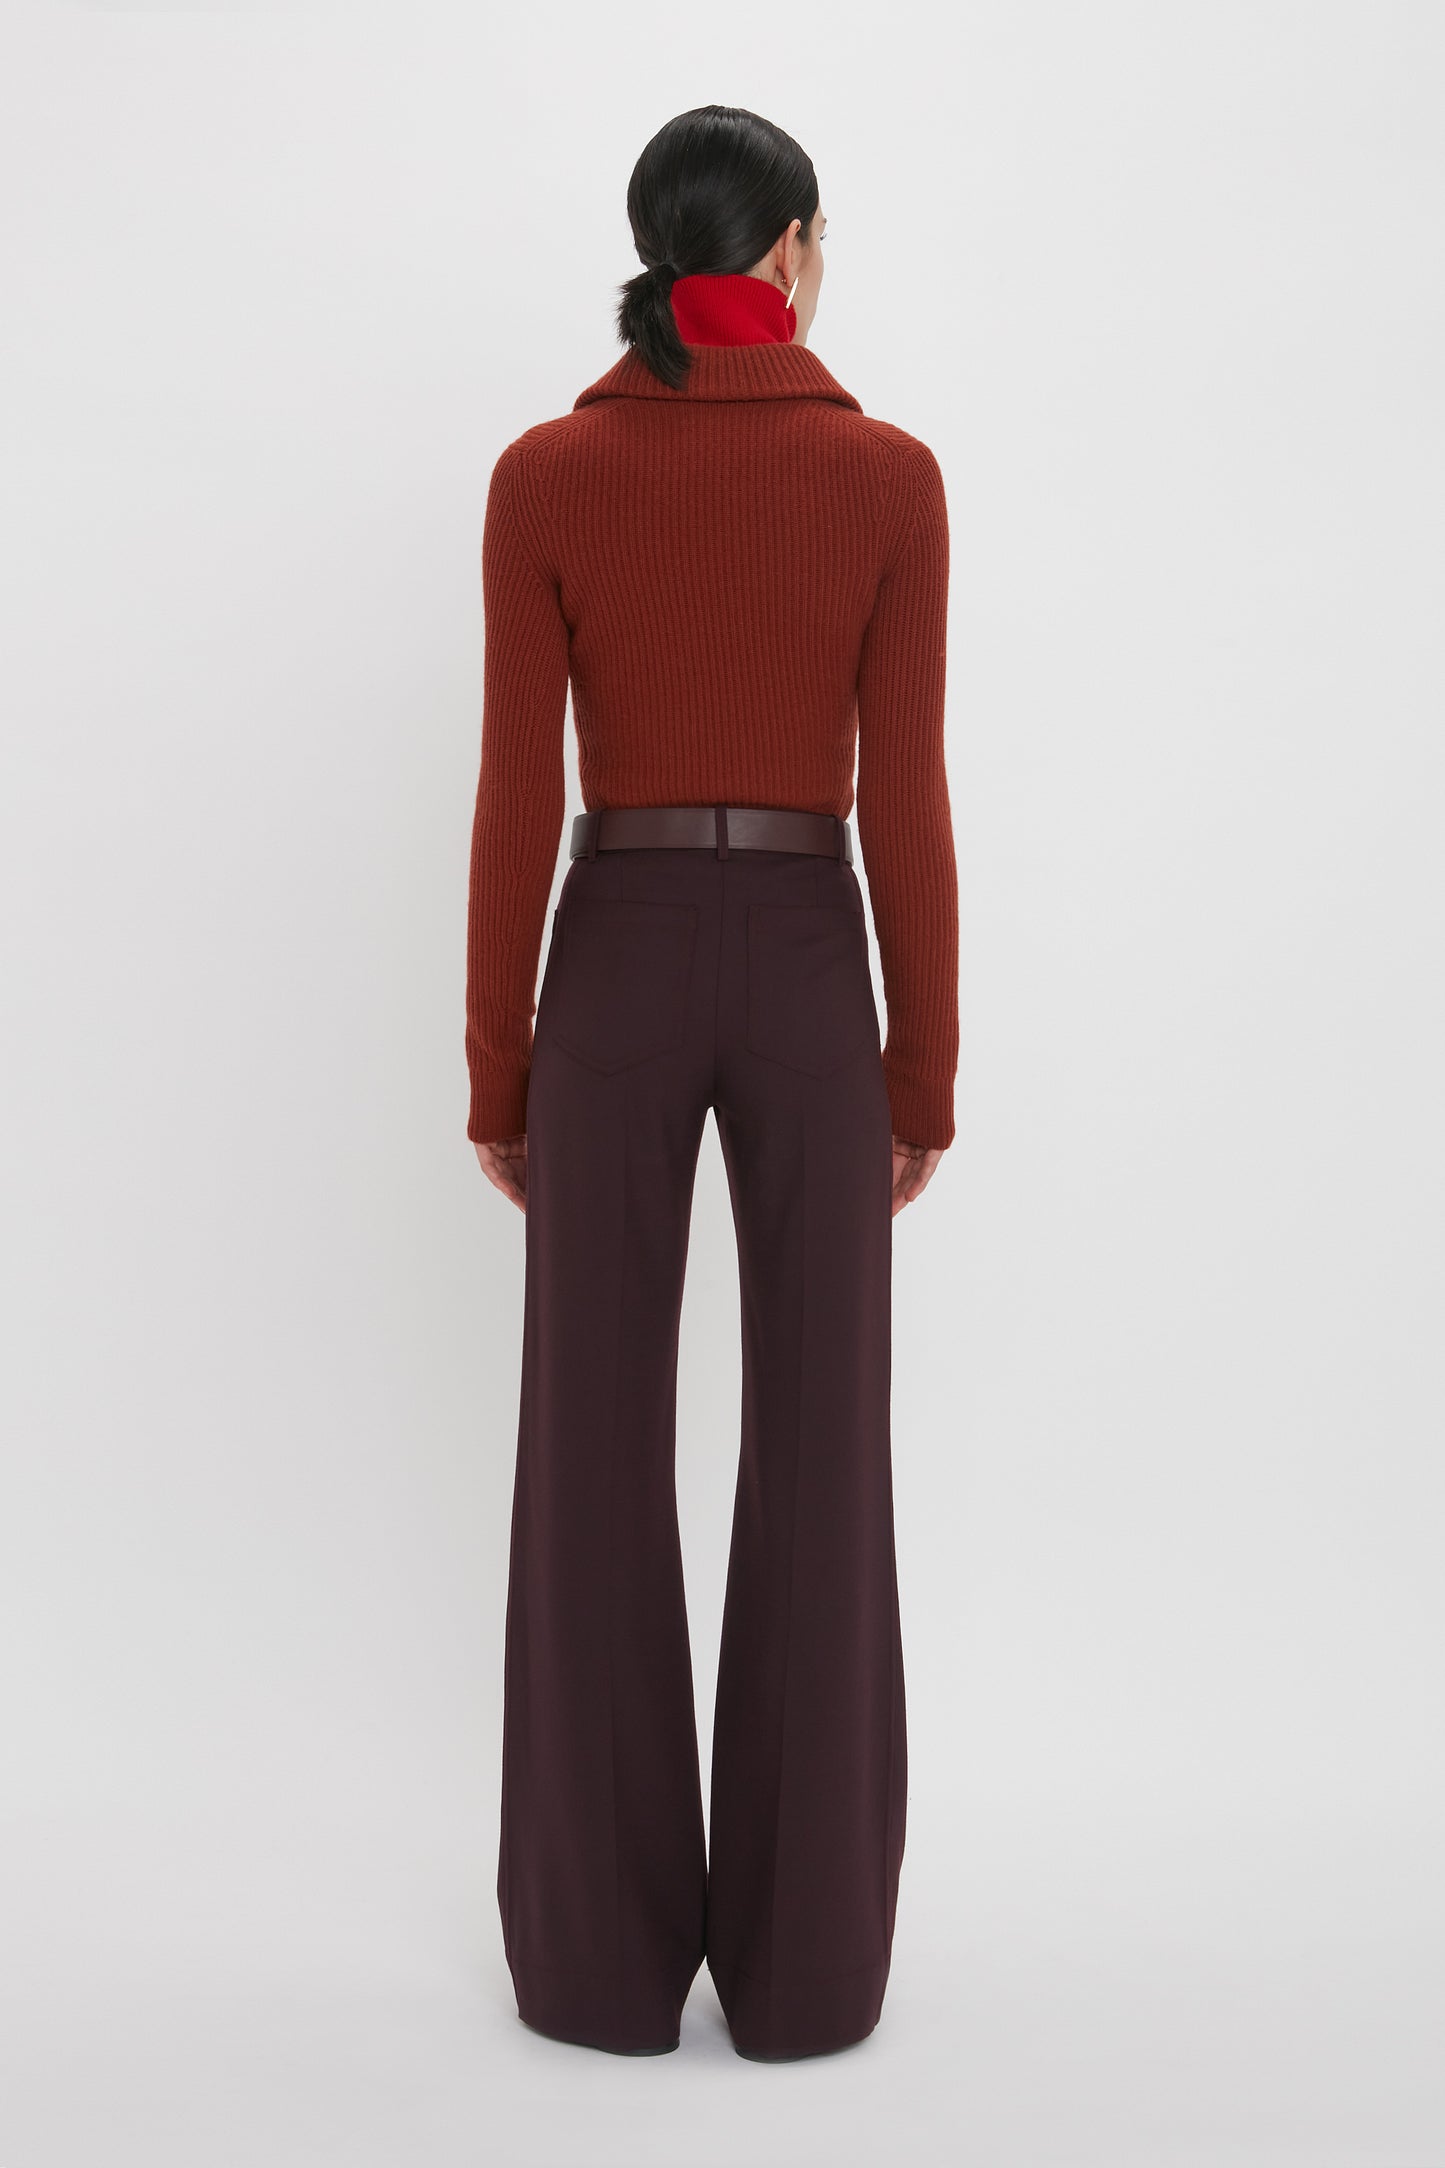 Person with dark hair in a ponytail, wearing a red turtleneck sweater and high-waisted, wide-leg Victoria Beckham Alina Trouser In Deep Mahogany pants made from recycled wool, viewed from the back against a plain white background.